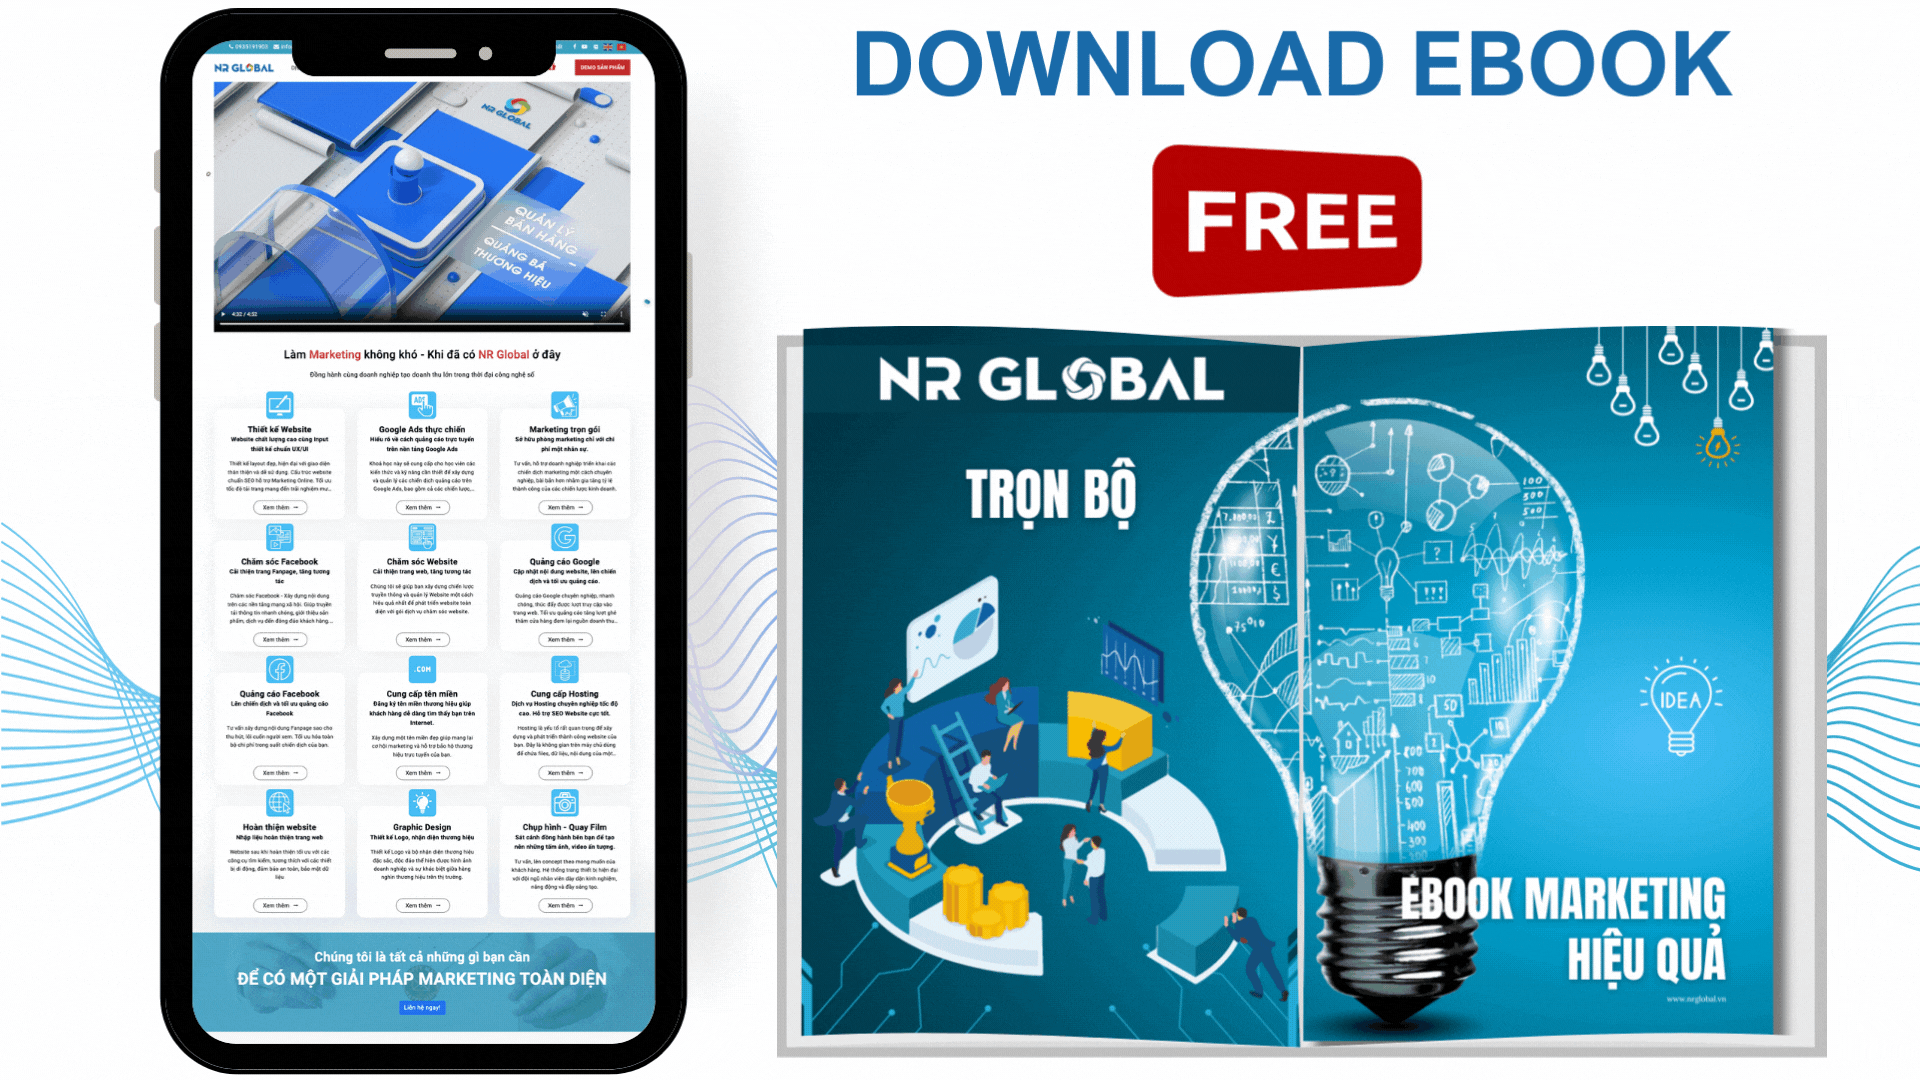 Download your Free Ebook (1)